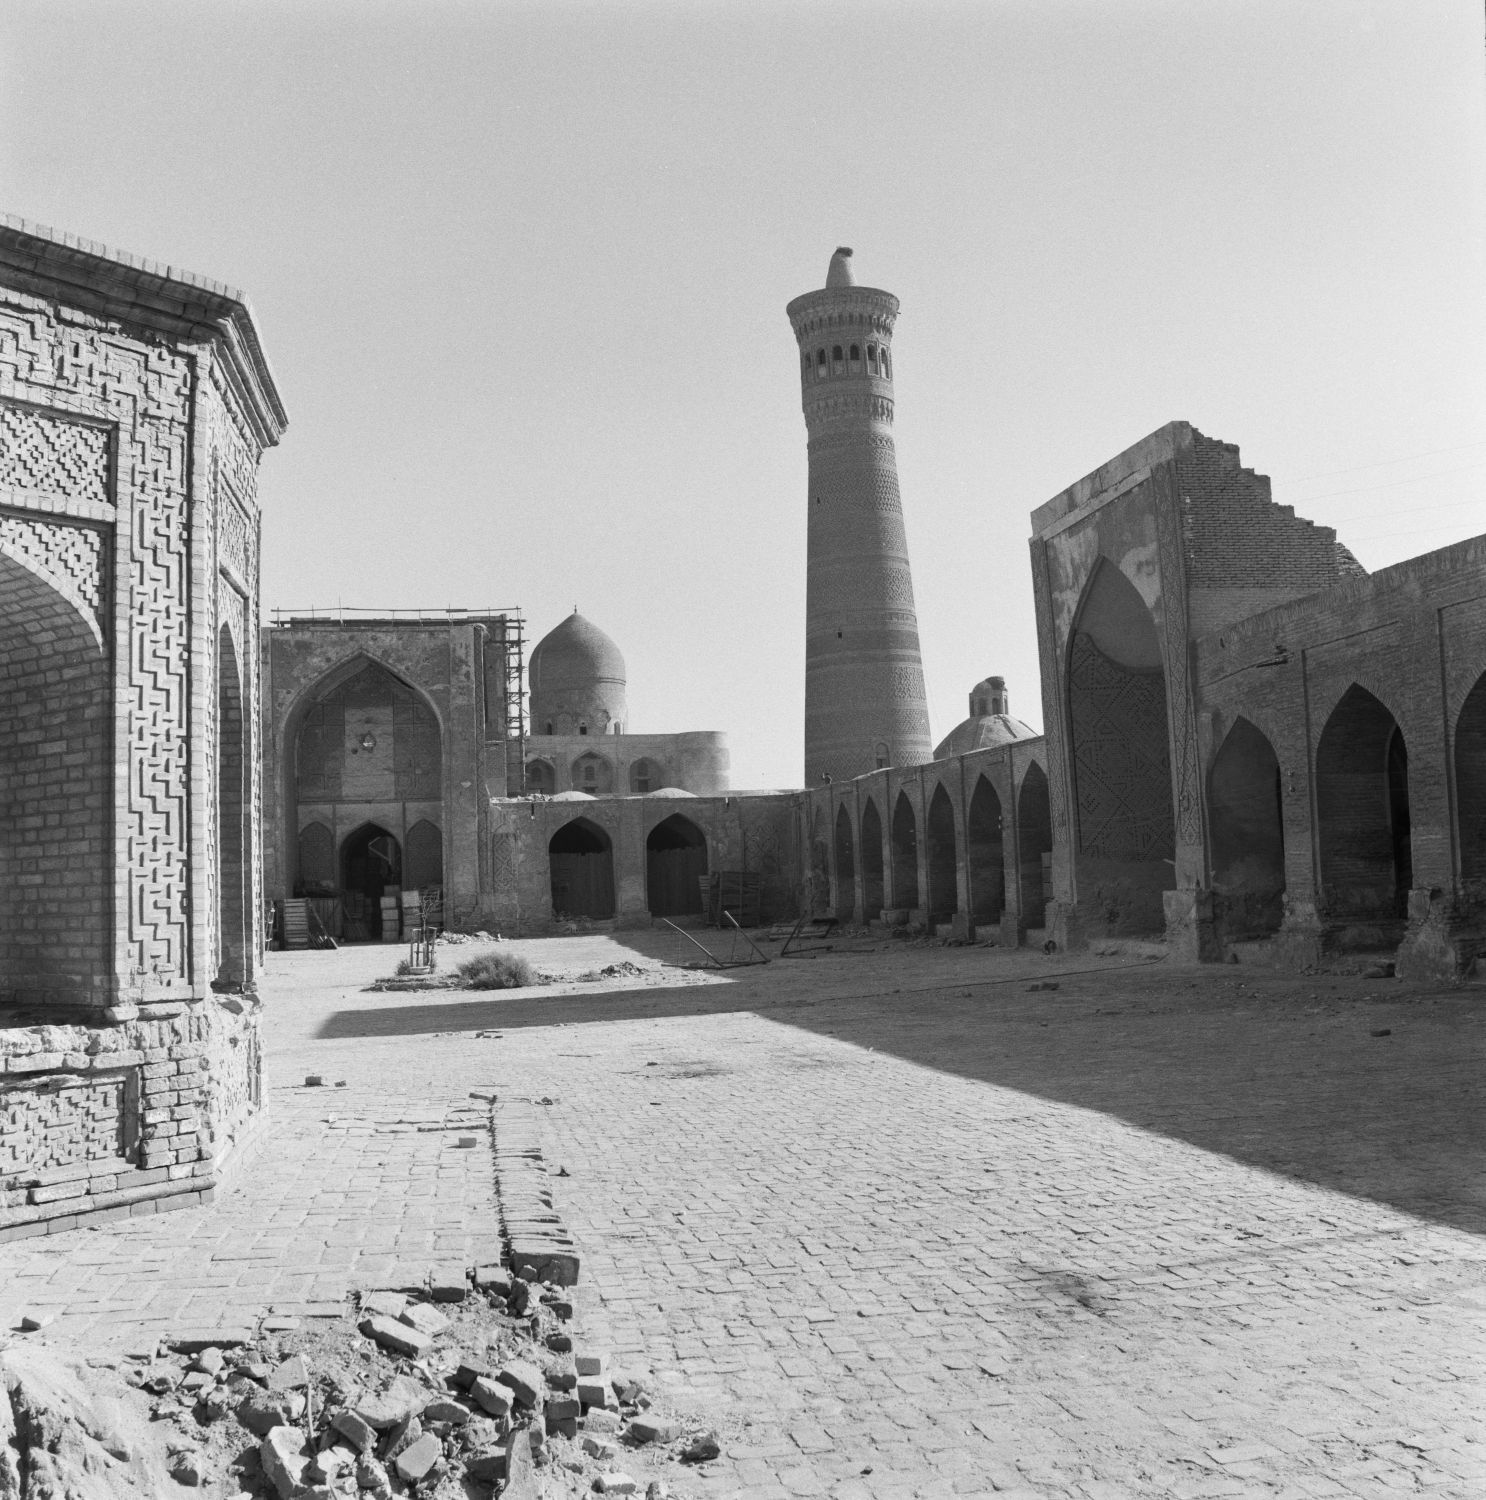 View of the courtyard of Kalan Mosque with minaret in the background